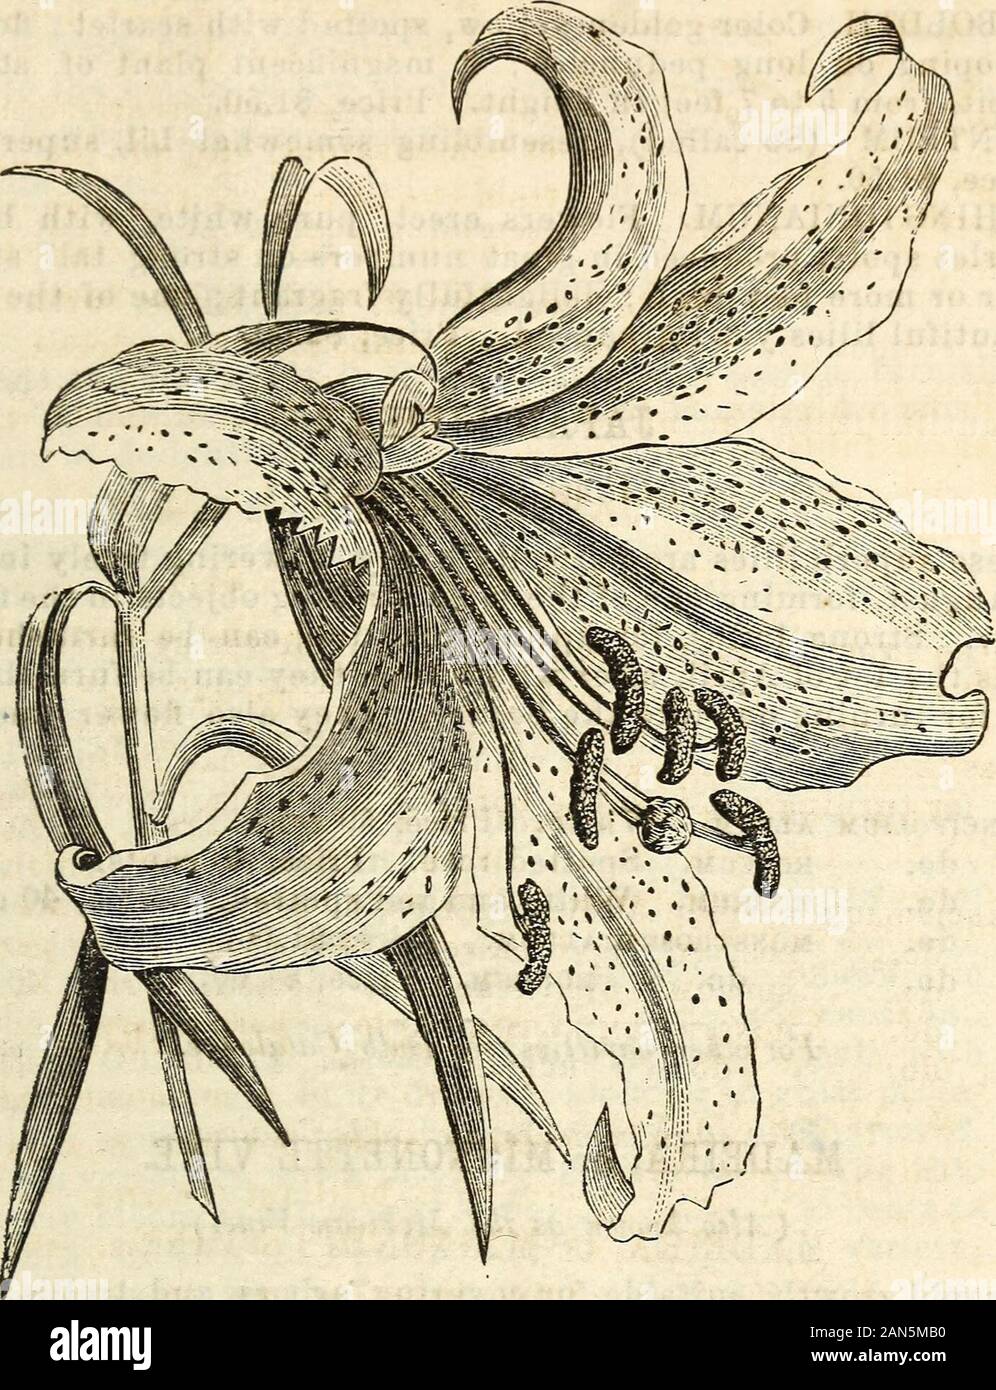 Dreer's garden calendar 1872 . dreers garden calendar. isa. This superb Lily lias flowers from ten to twelve inches across,composed of six delicate white ivory-like petals, each beingthickly studded with rich chocolate-crimson spots, and having abright golden band through the centre of each petal, with anexquisite vanilla-like perfume. As the bulbs acquire age andstrength, the flowers obtain their maximum size and number.Upwards of twelve flowers have been produced on a single stem.It is perfectly hardy in dry soils, and is also admirably adaptedfor pot culture. Strong flowering bulbs, $1.00 t Stock Photo